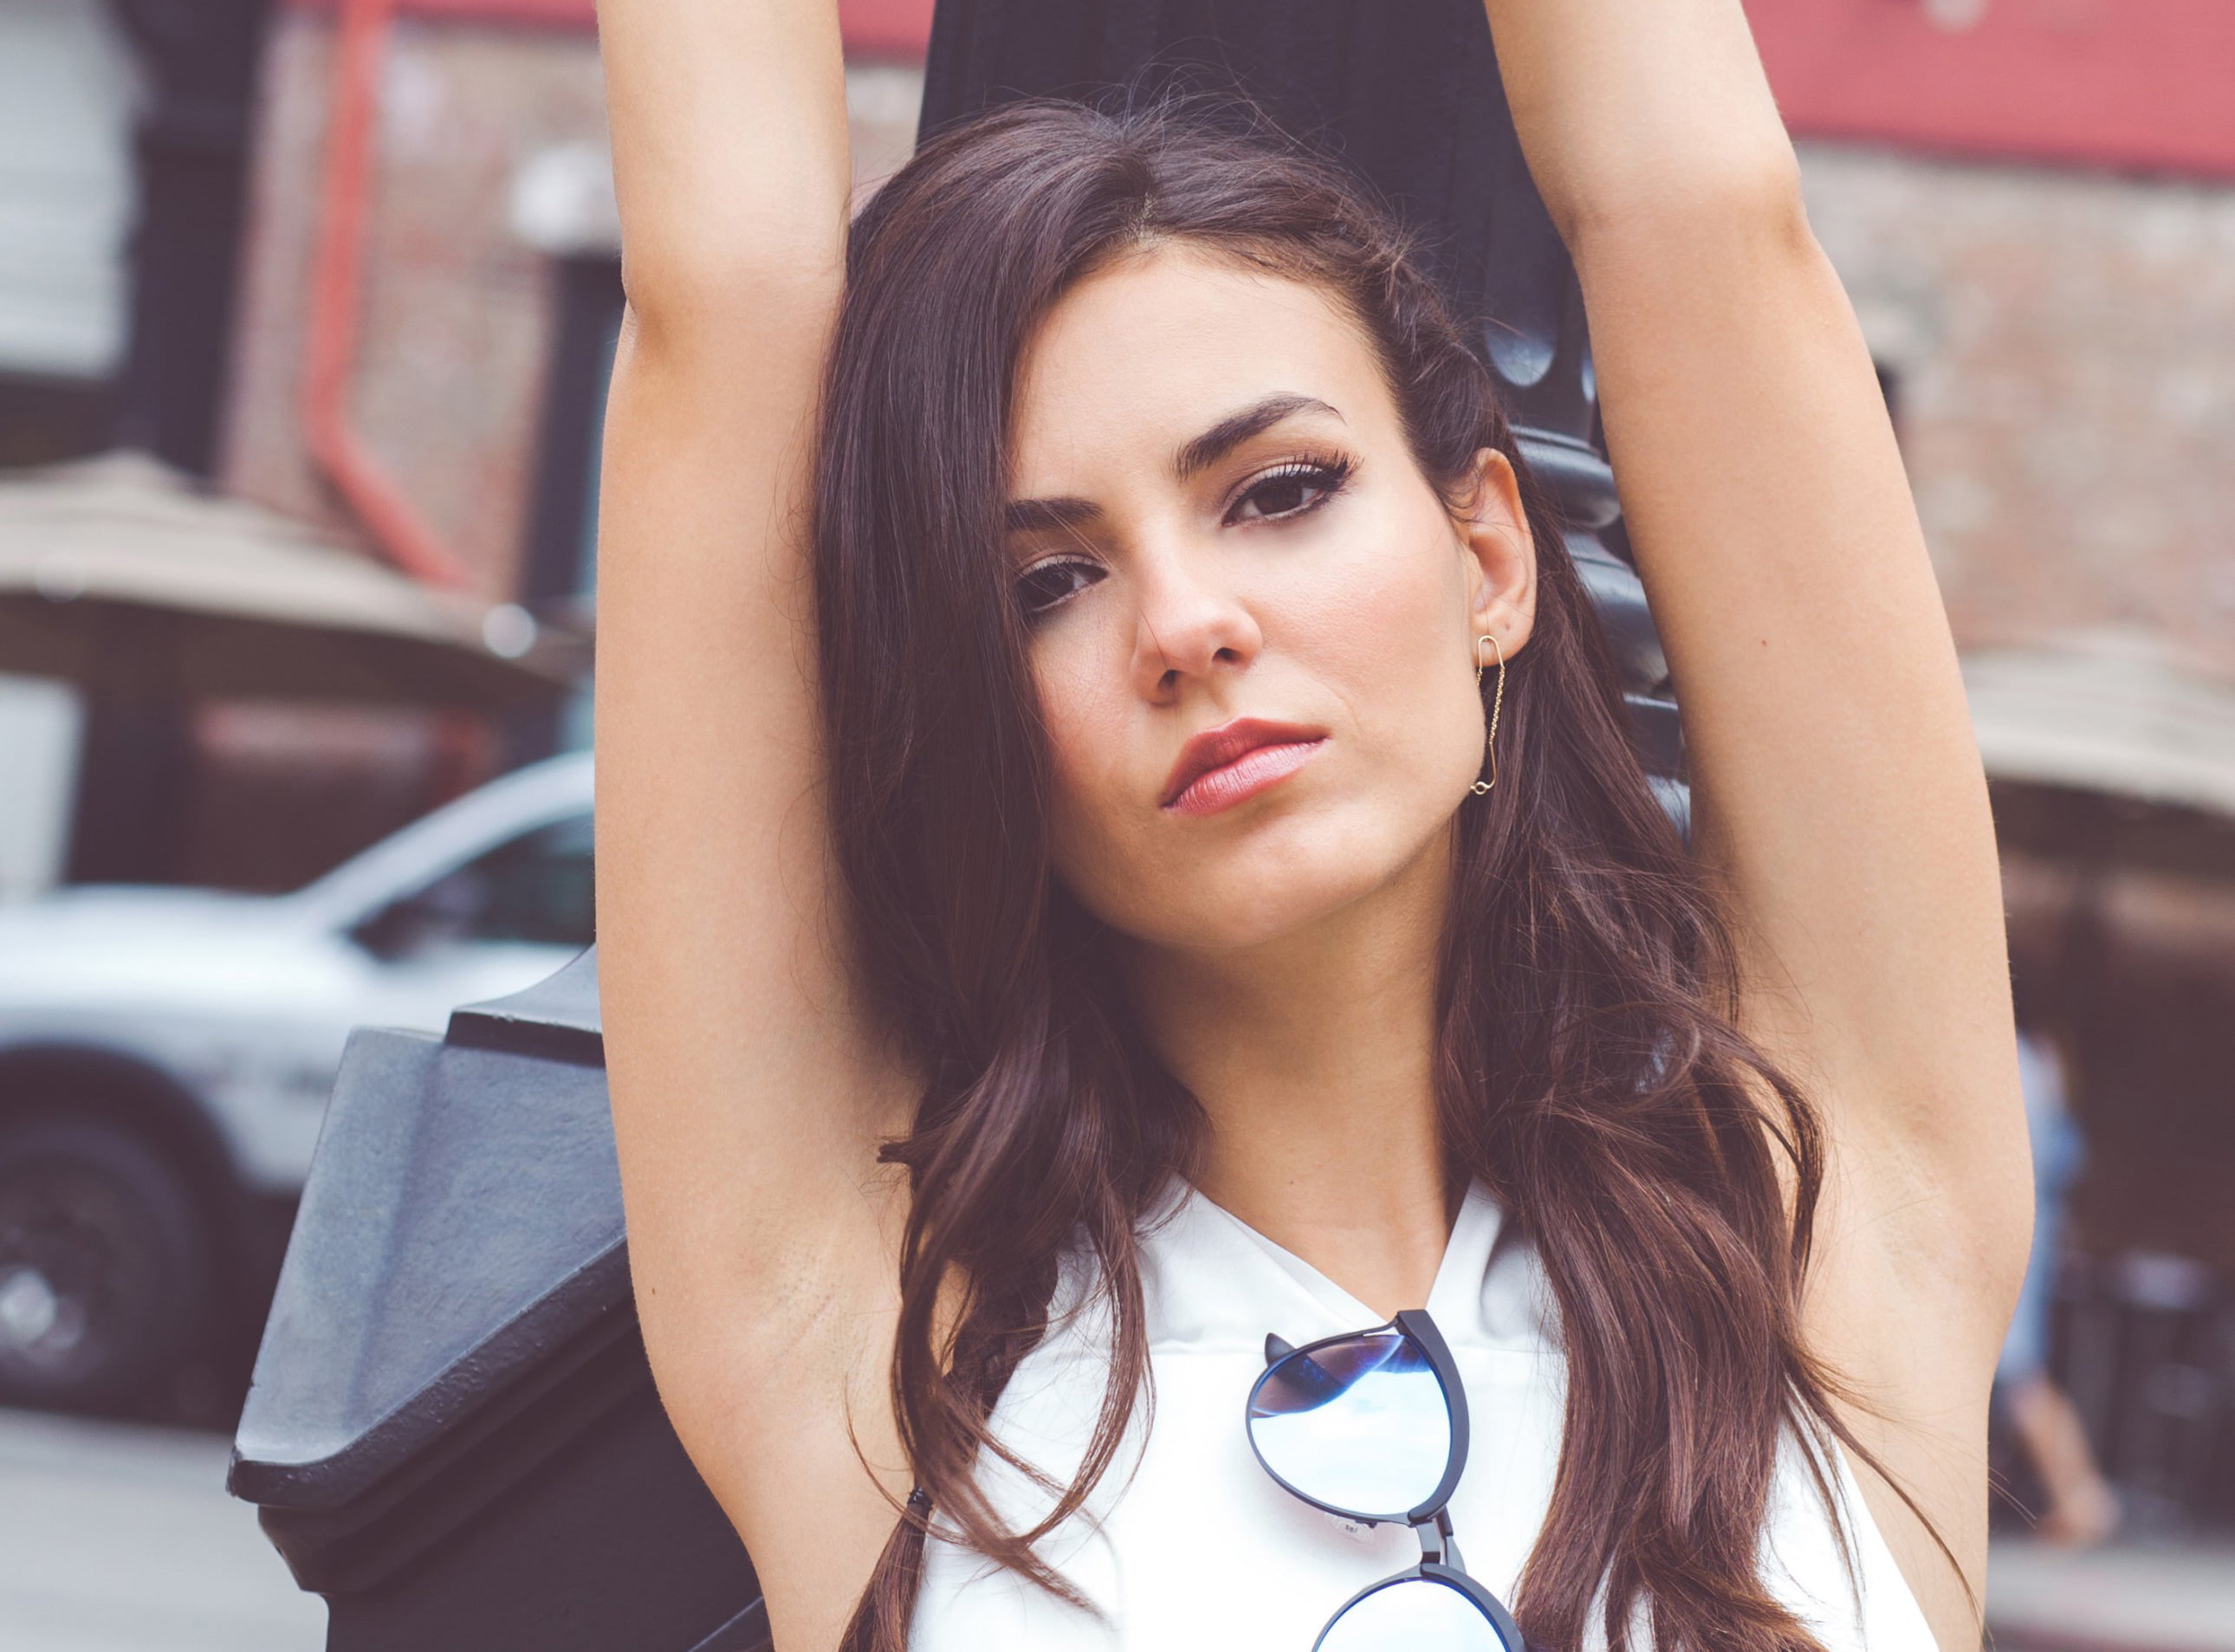 victoria justice, celebrities, girls, hd, young adult, one person